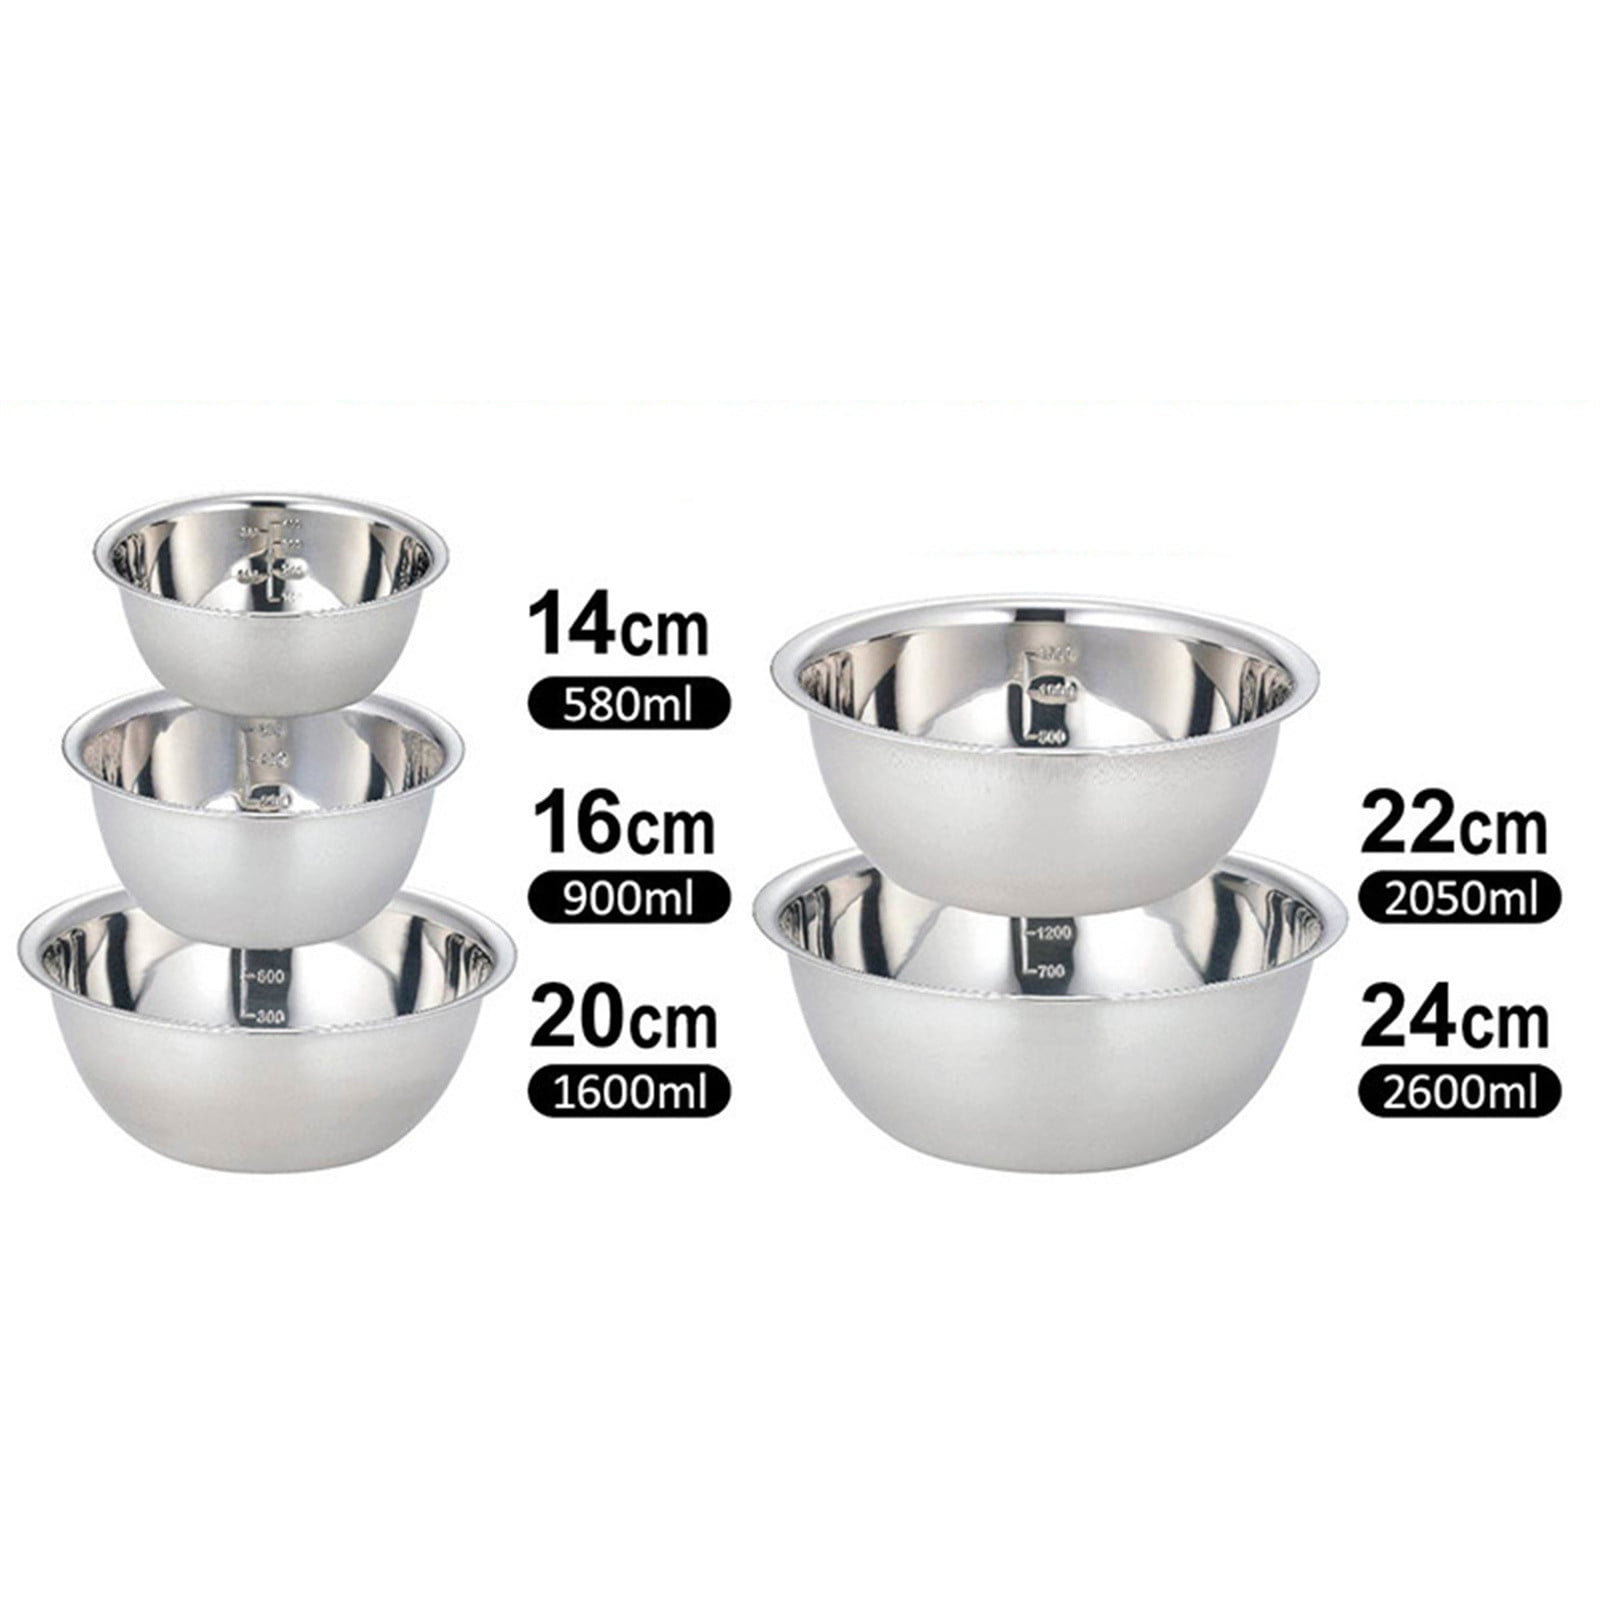 Sagler mixing bowls - mixing bowl Set of 6 - stainless steel mixing bowls -  Polished Mirror kitchen bowls - Set Includes 戮, 2, 3.5, 5